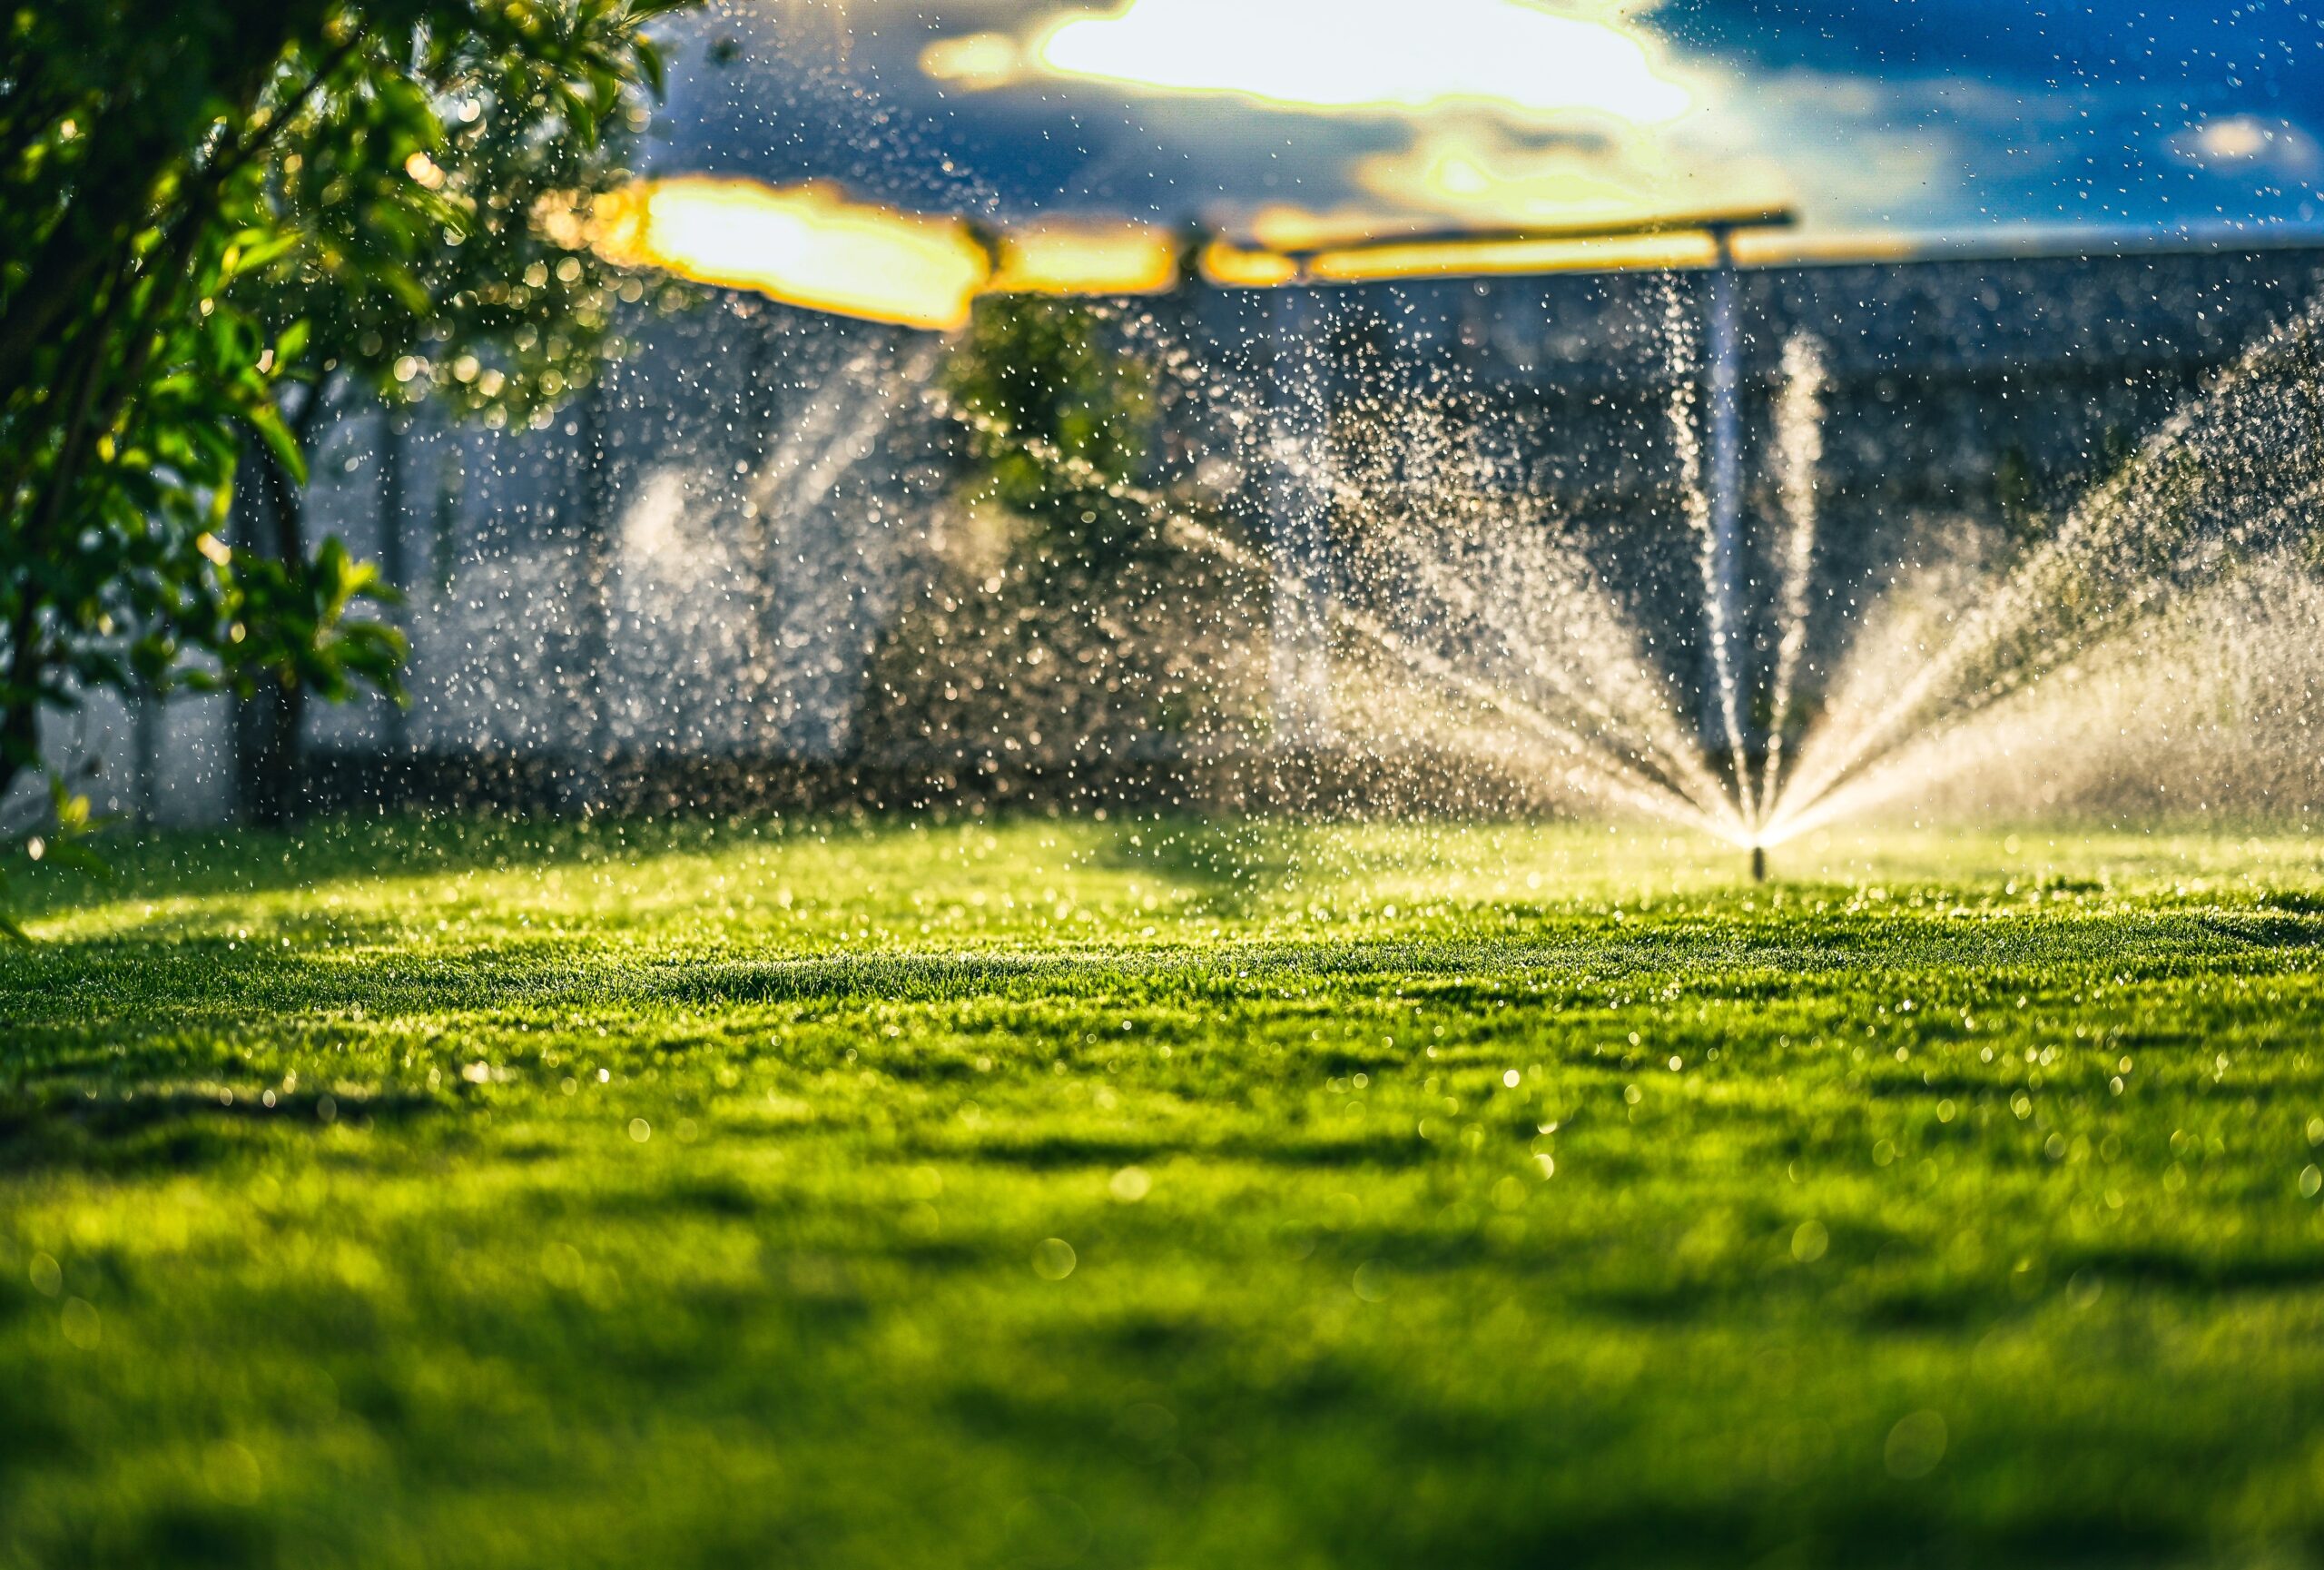 Our automatic sprinkler systems will give you a beautiful landscape, and more free time to enjoy the results.

With GELS irrigation systems you can be sure that your lawn will receive the right amount of water, in the right spots, and at the right time.